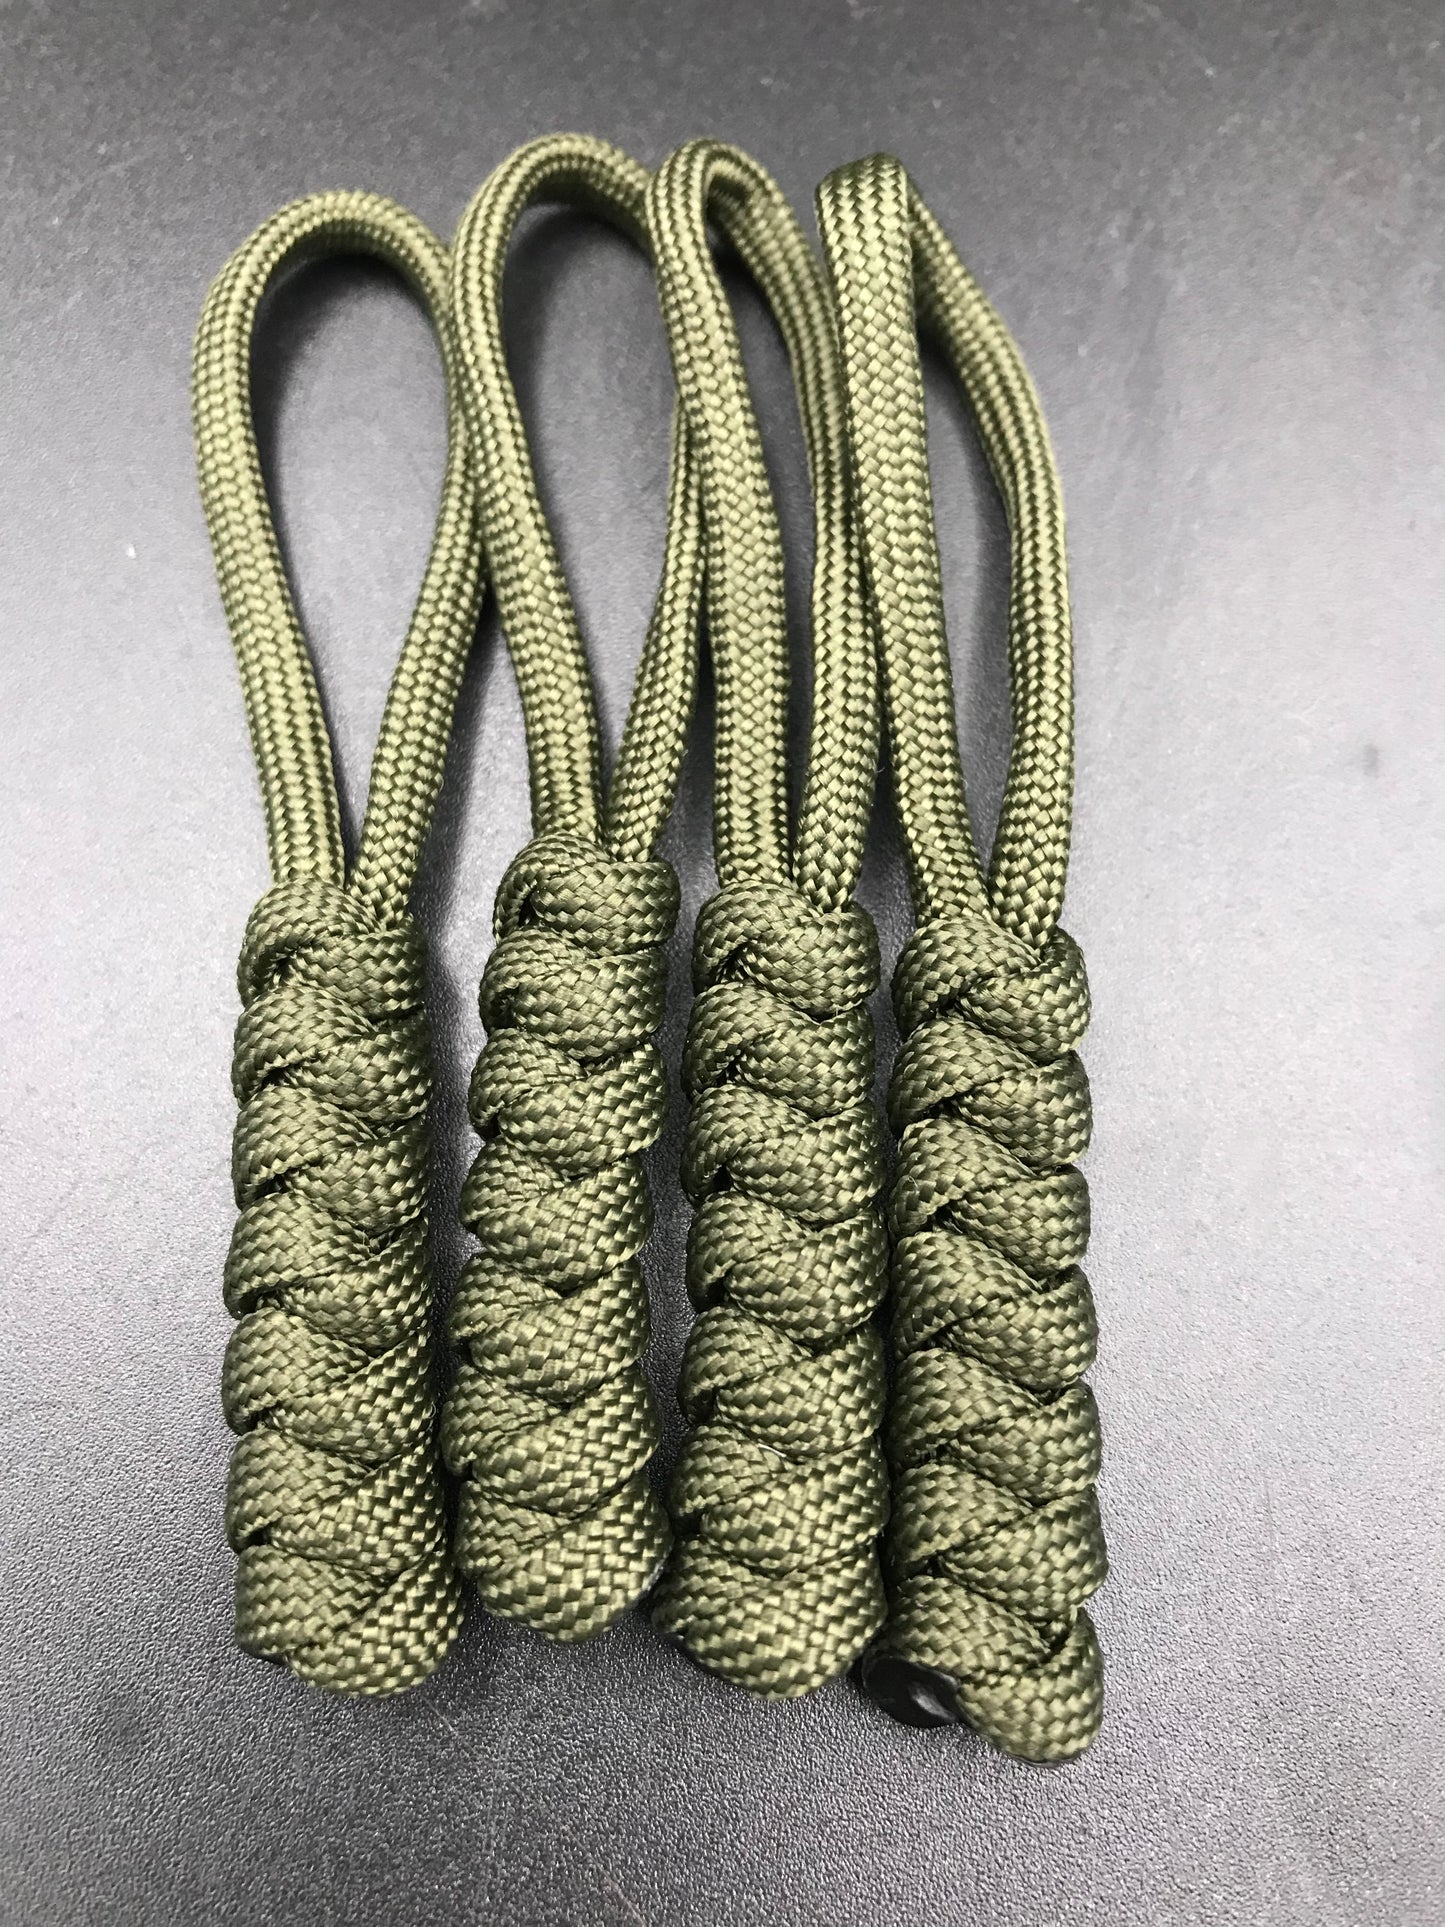 Paracord zip pulls in army Olive green (4 pack) light weight, strong and hand crafted in U.K